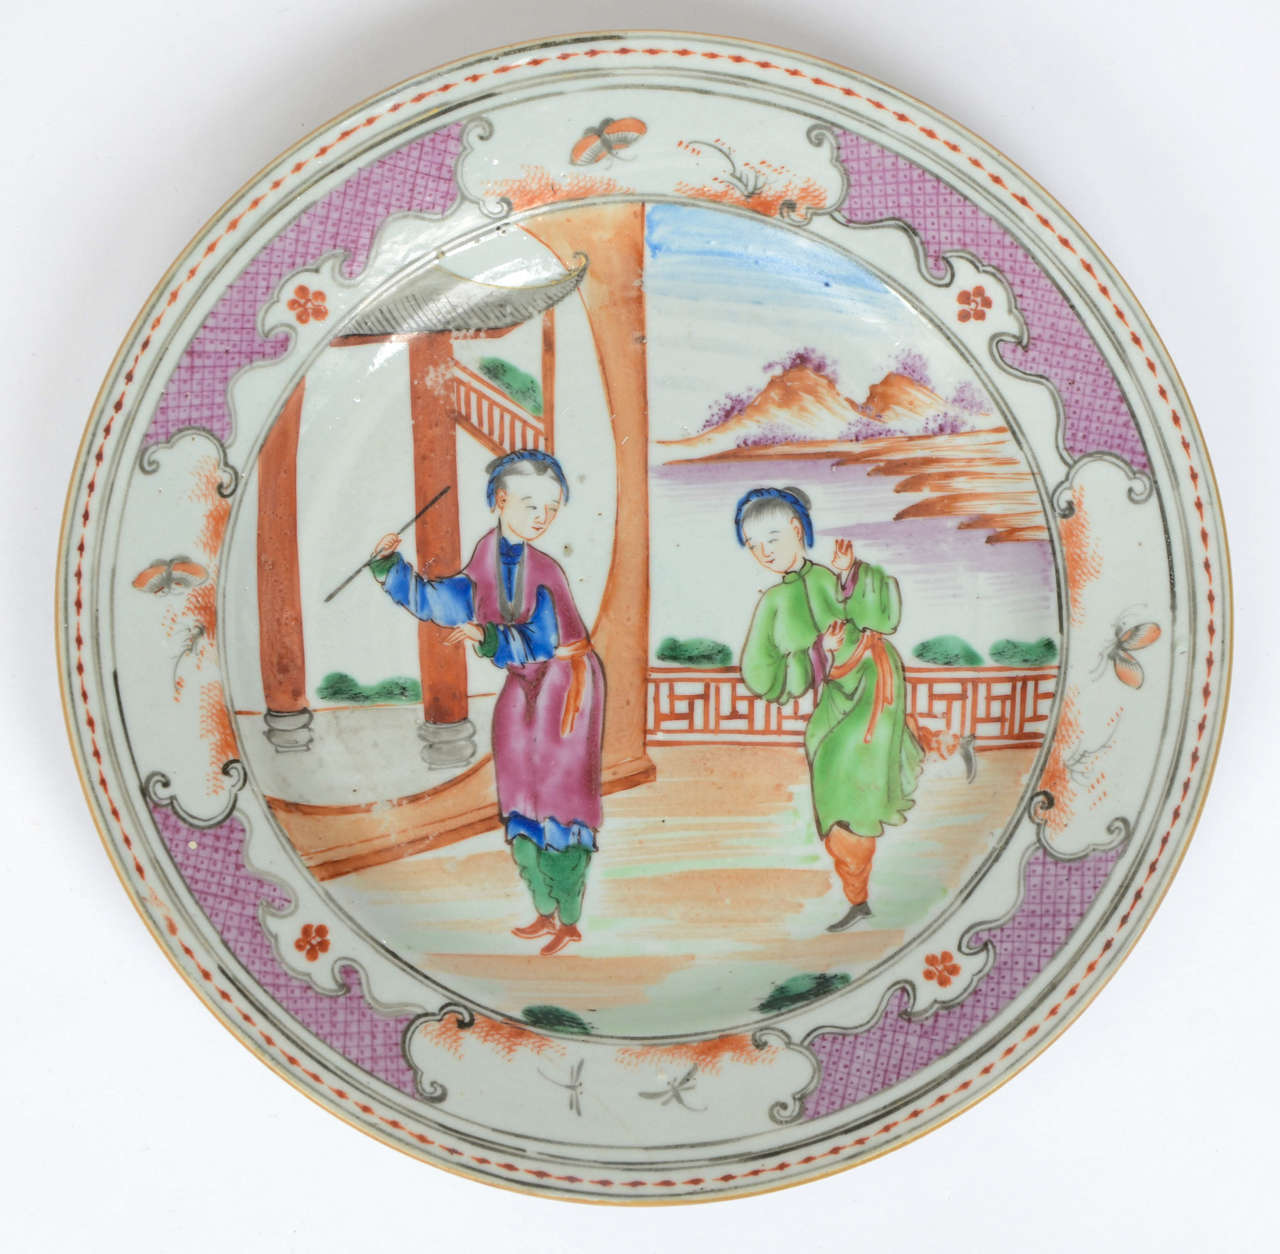 A fine Chinese plate from the 18th century, Qing dynasty, Qianlong period, 1736-1795.

It is beautifully decorated with a pagoda setting, having two figures stood on a veranda, with a lake and mountains in the background. The design is set within